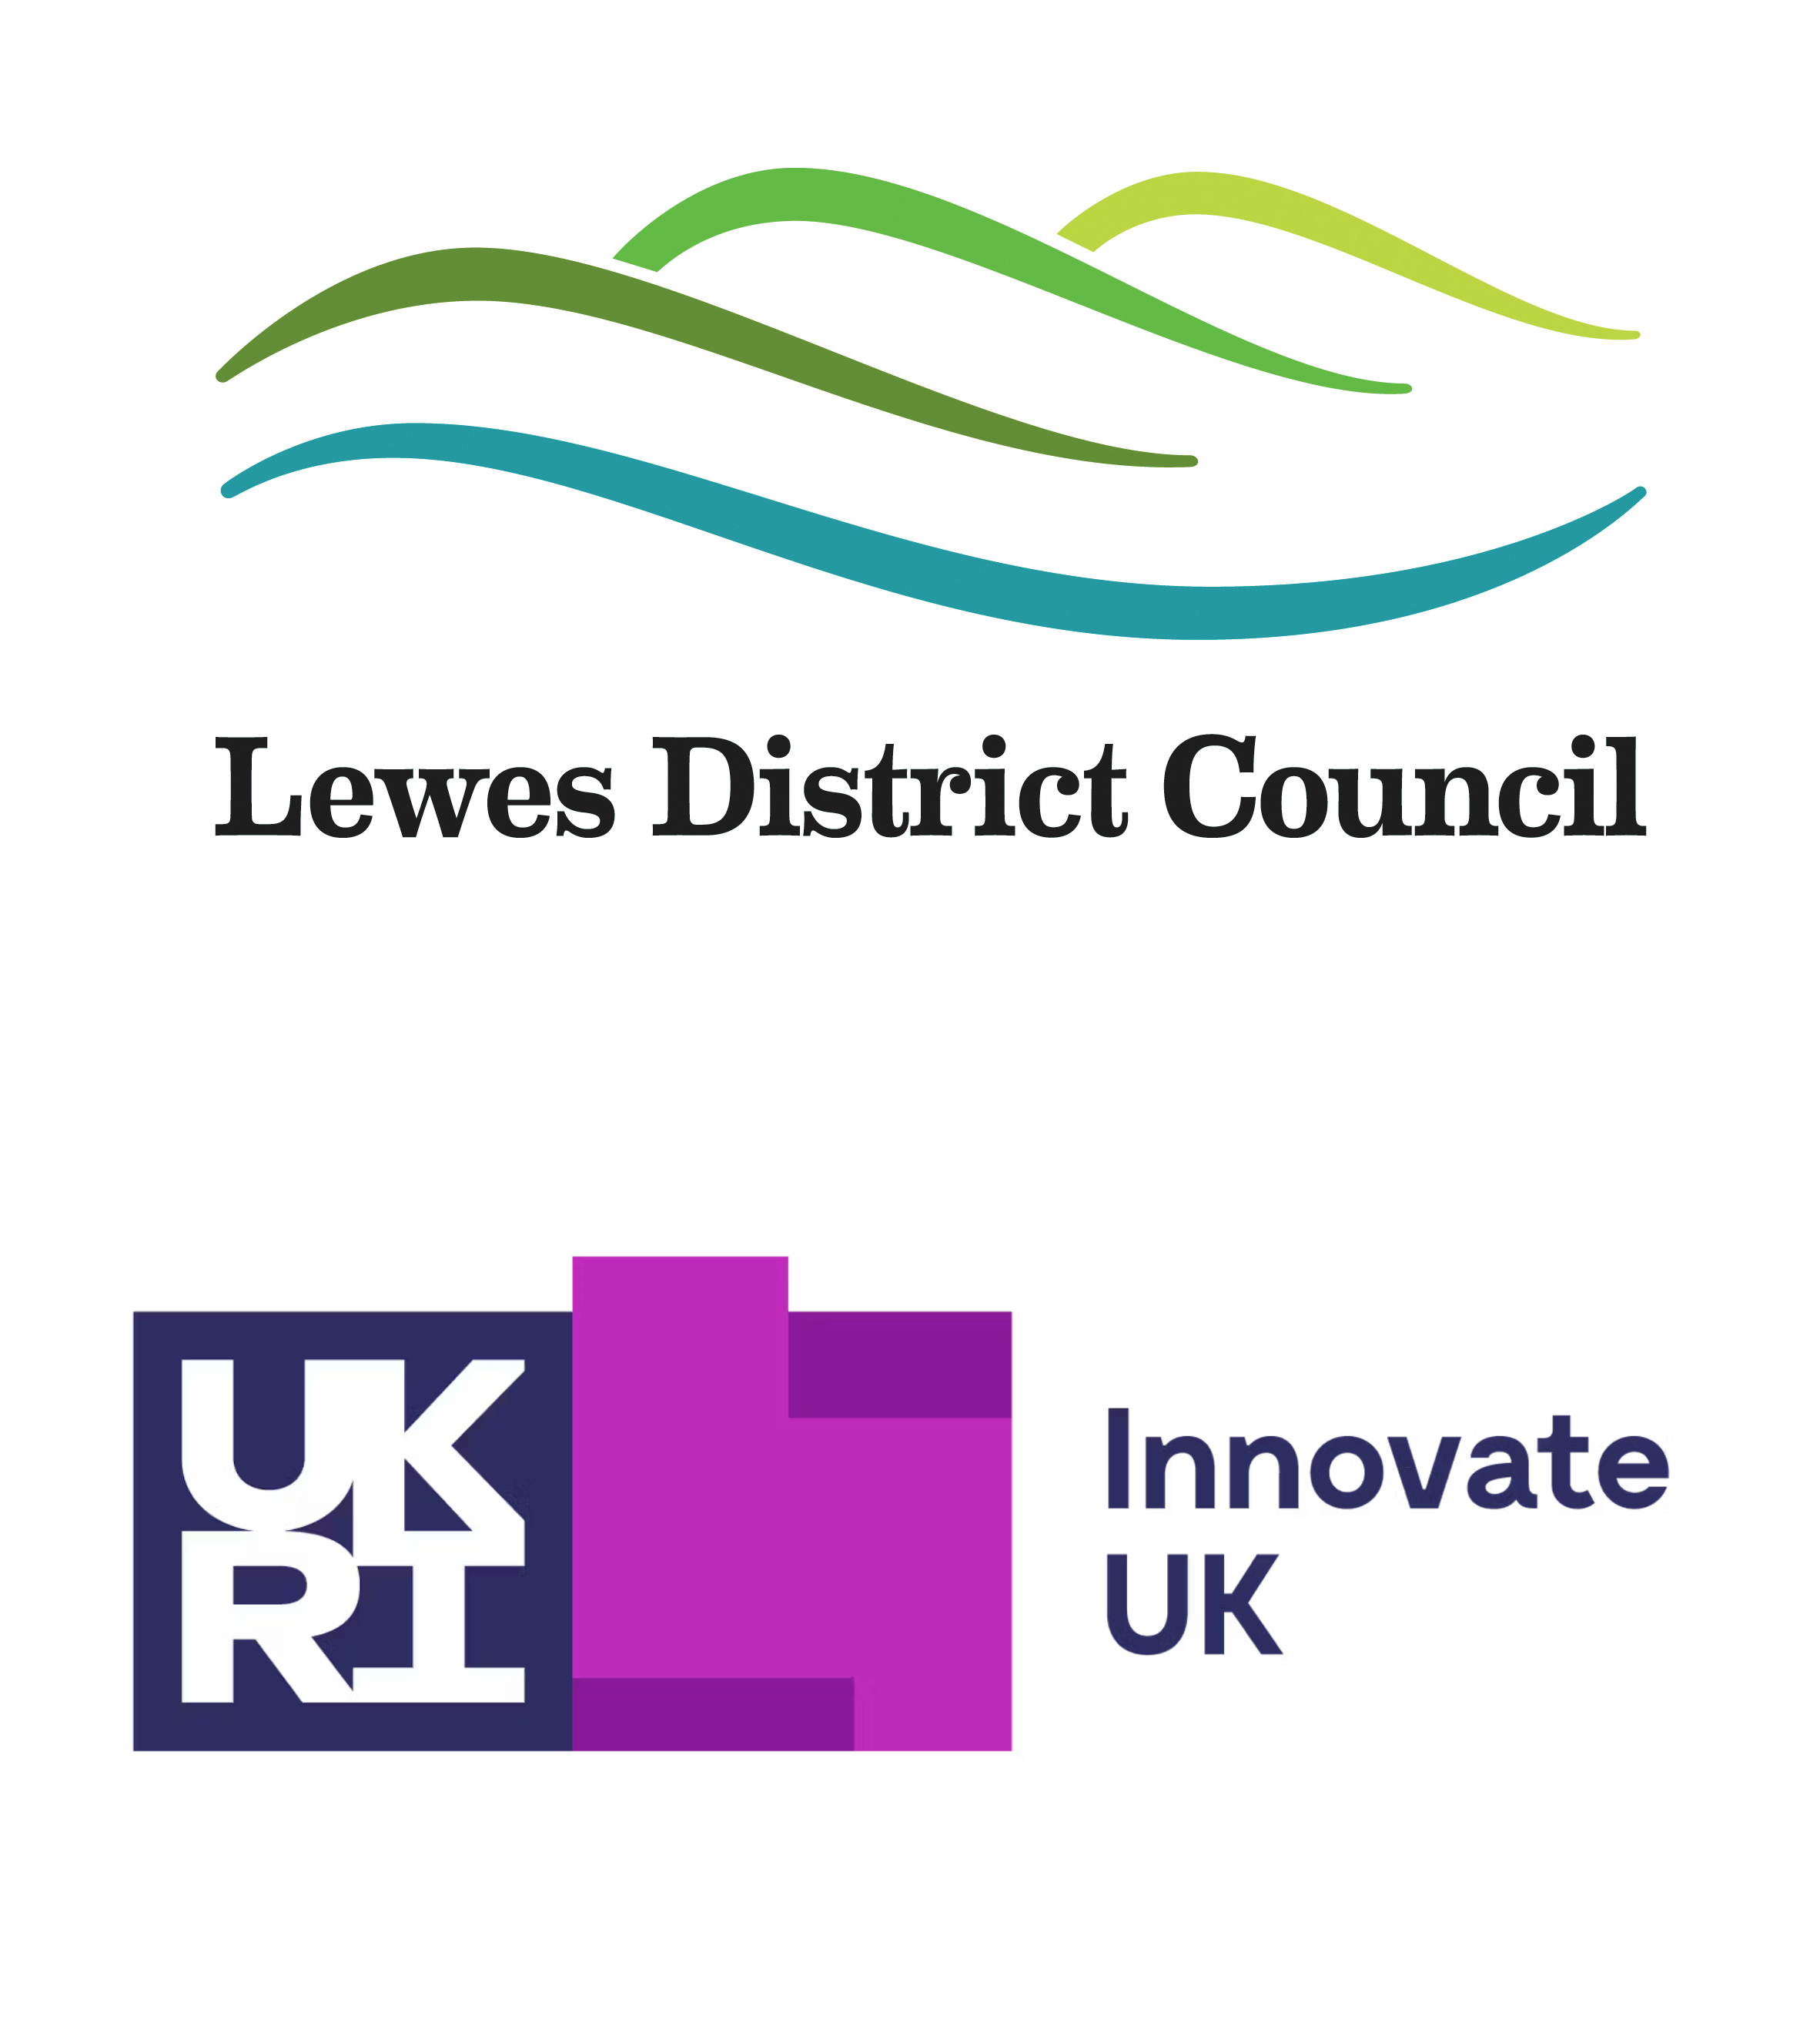 Lewes District Council and Innovate UK Logos